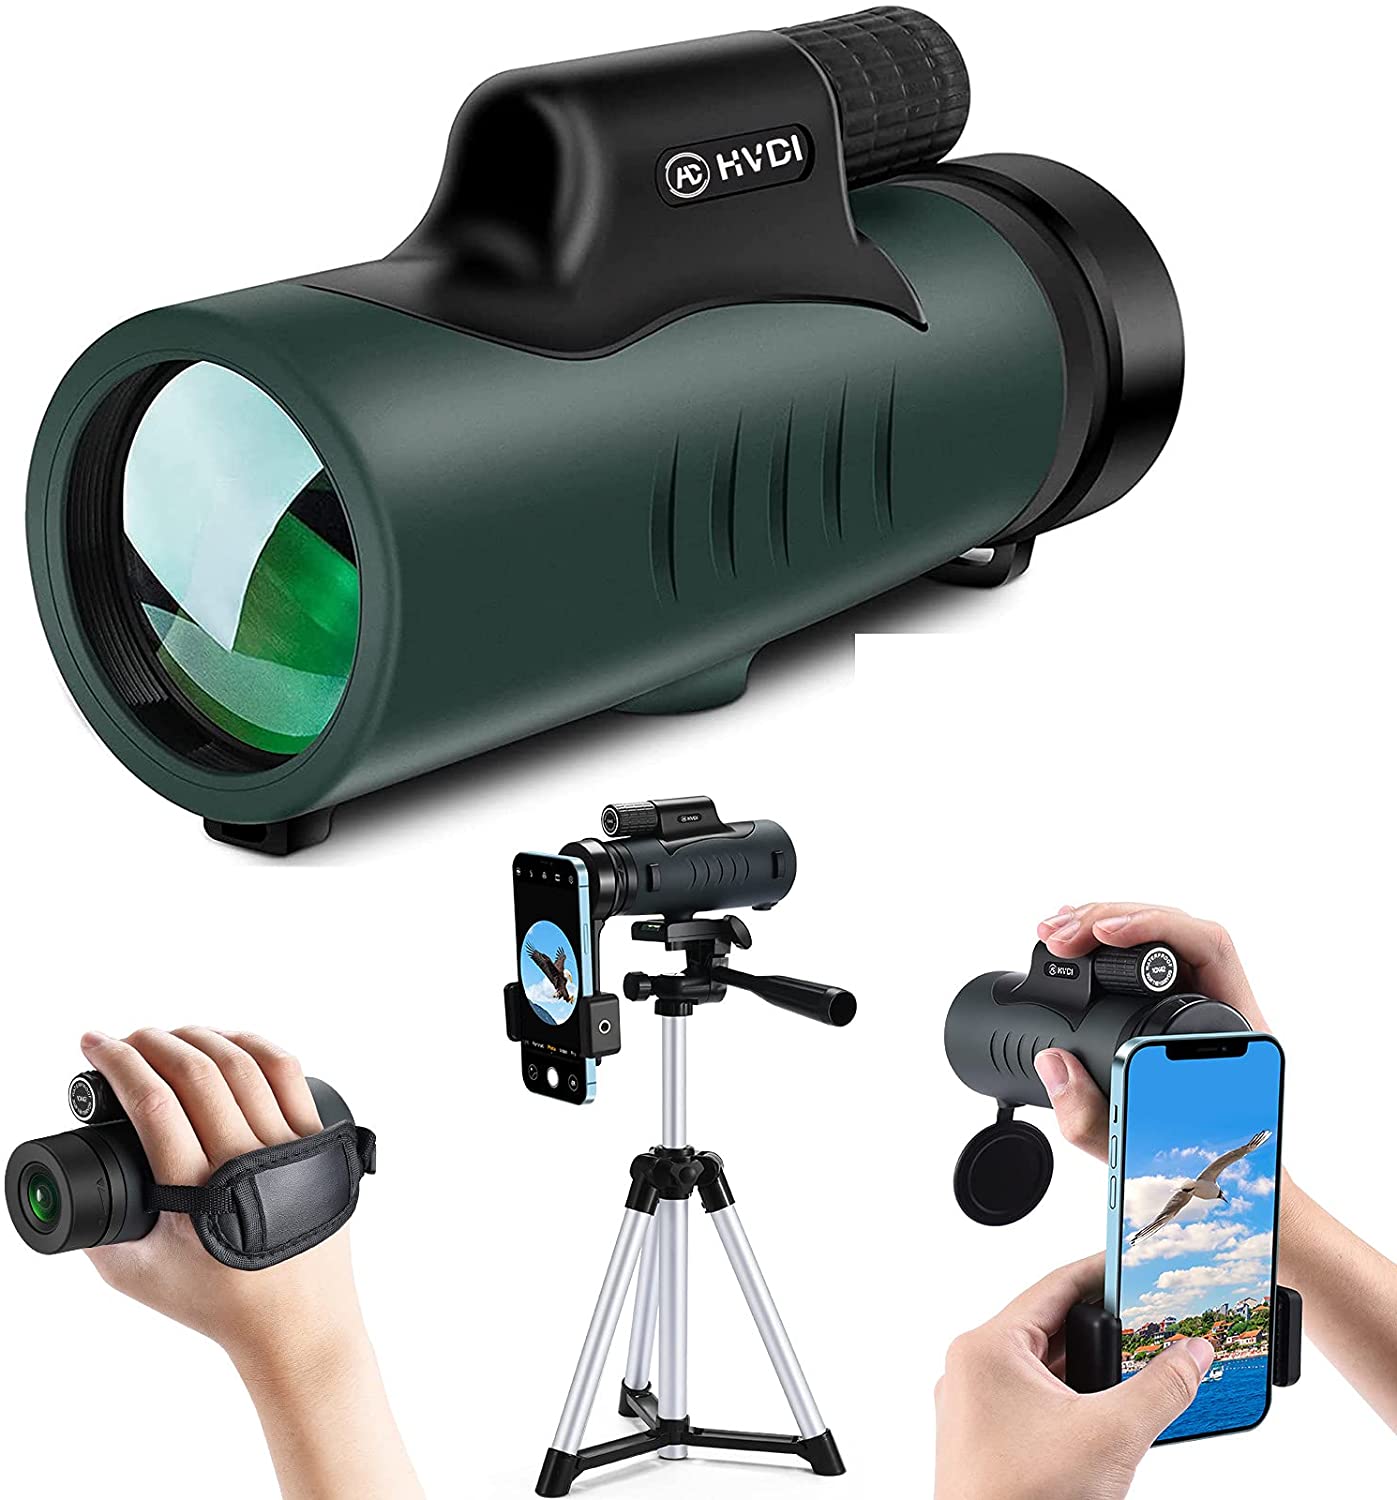 High Power 10-30x42 Monocular Telescope,Monoculars with Phone Holder & Tripod Compatible with iPhone Android Smartphone,BAK4 Prism for Adult Kid Outdoor Bird Watching Wildlife Hunting Traveling